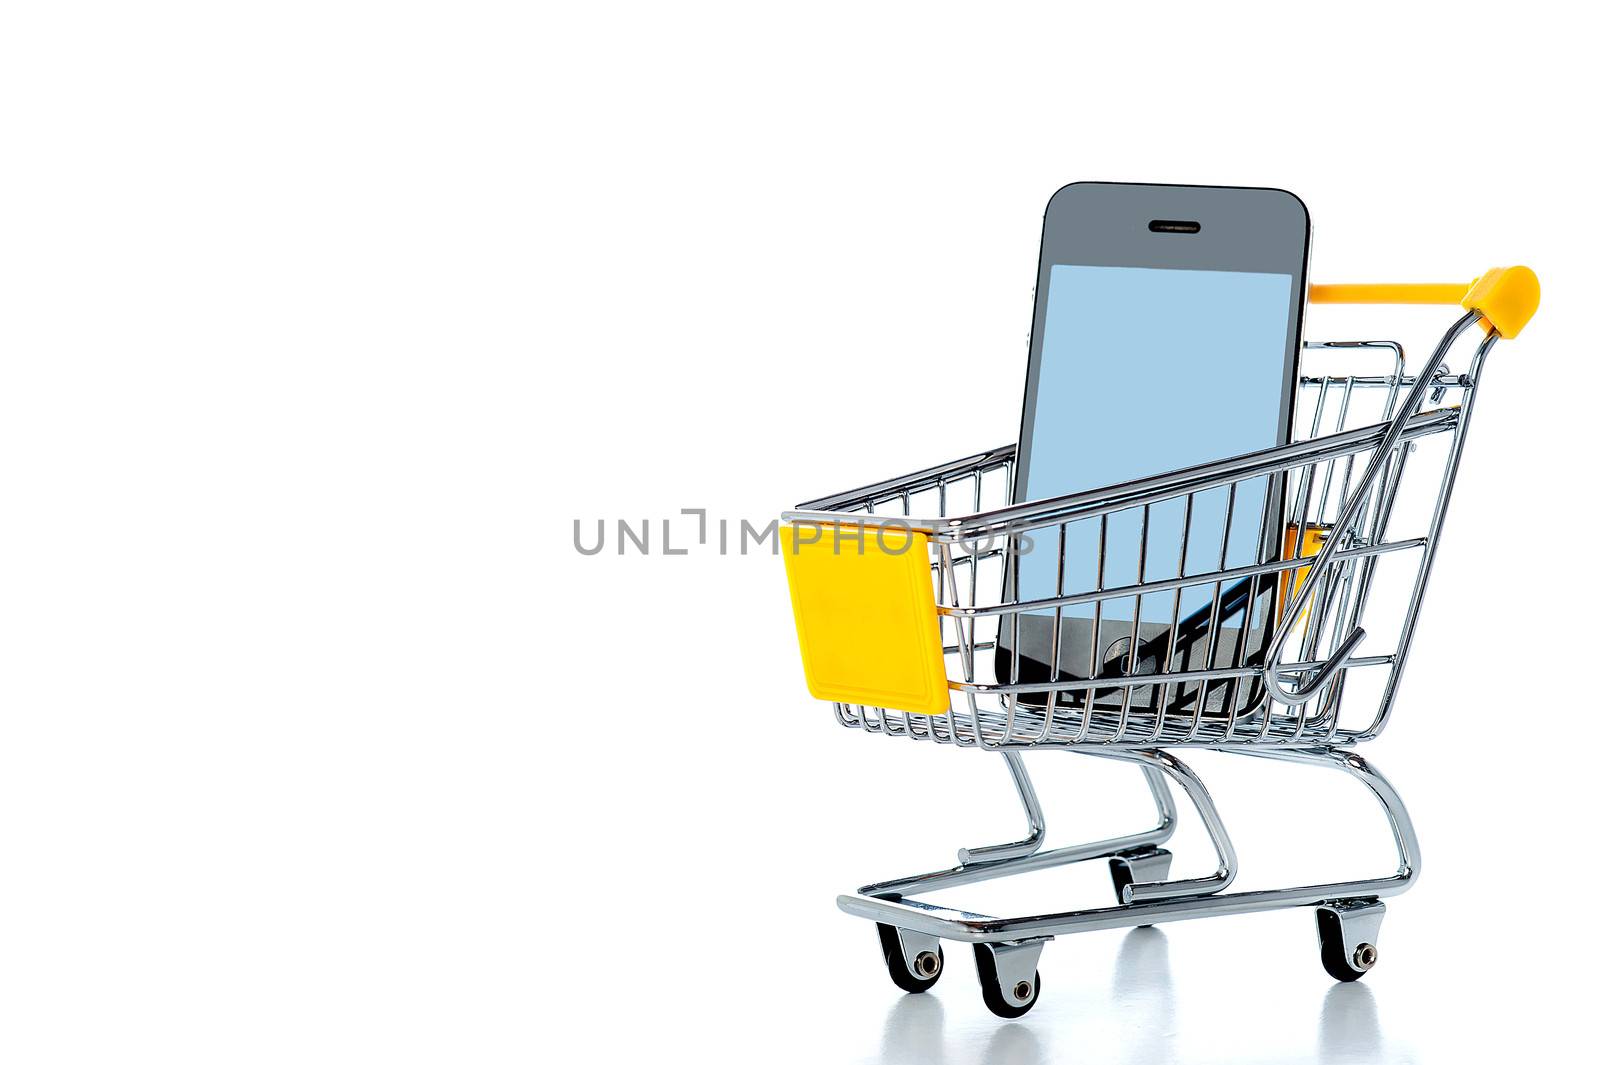 Mobile phone in shopping cart by stockyimages